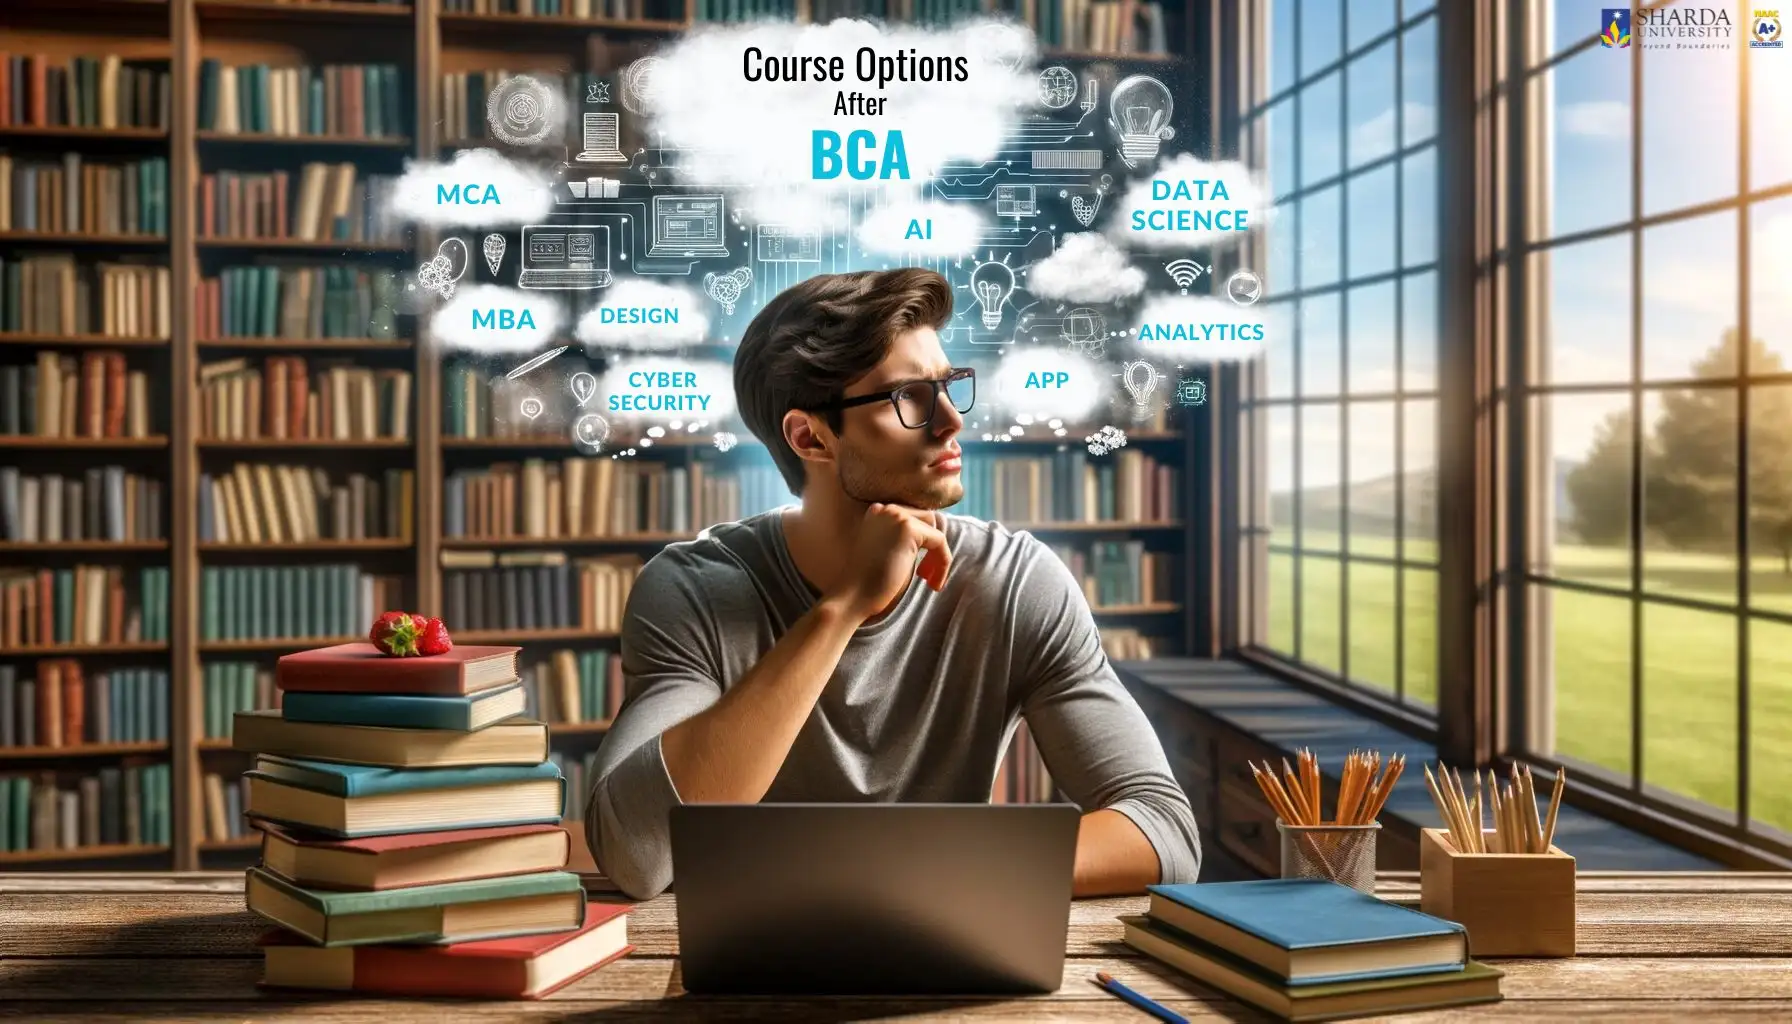  Best Course Options After Completing BCA